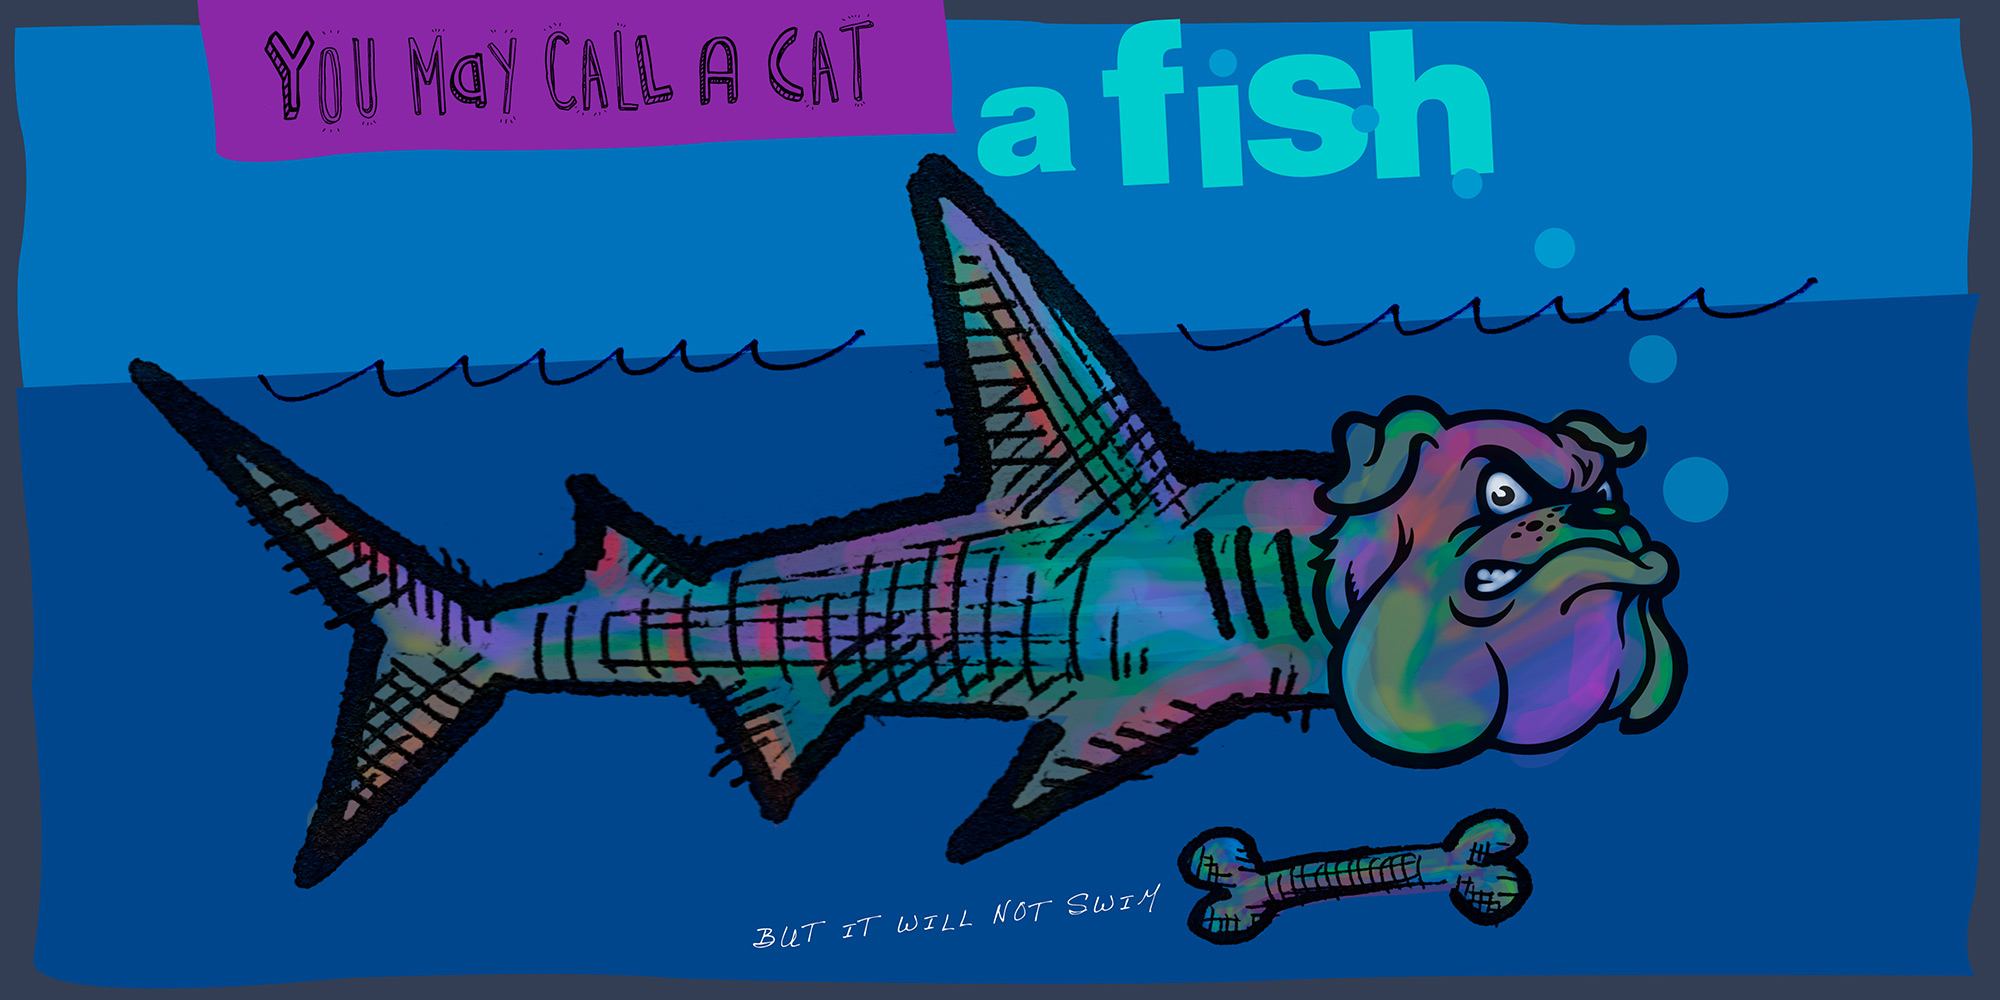 Jeff Kern design for "You May Call a Cat a Fish"